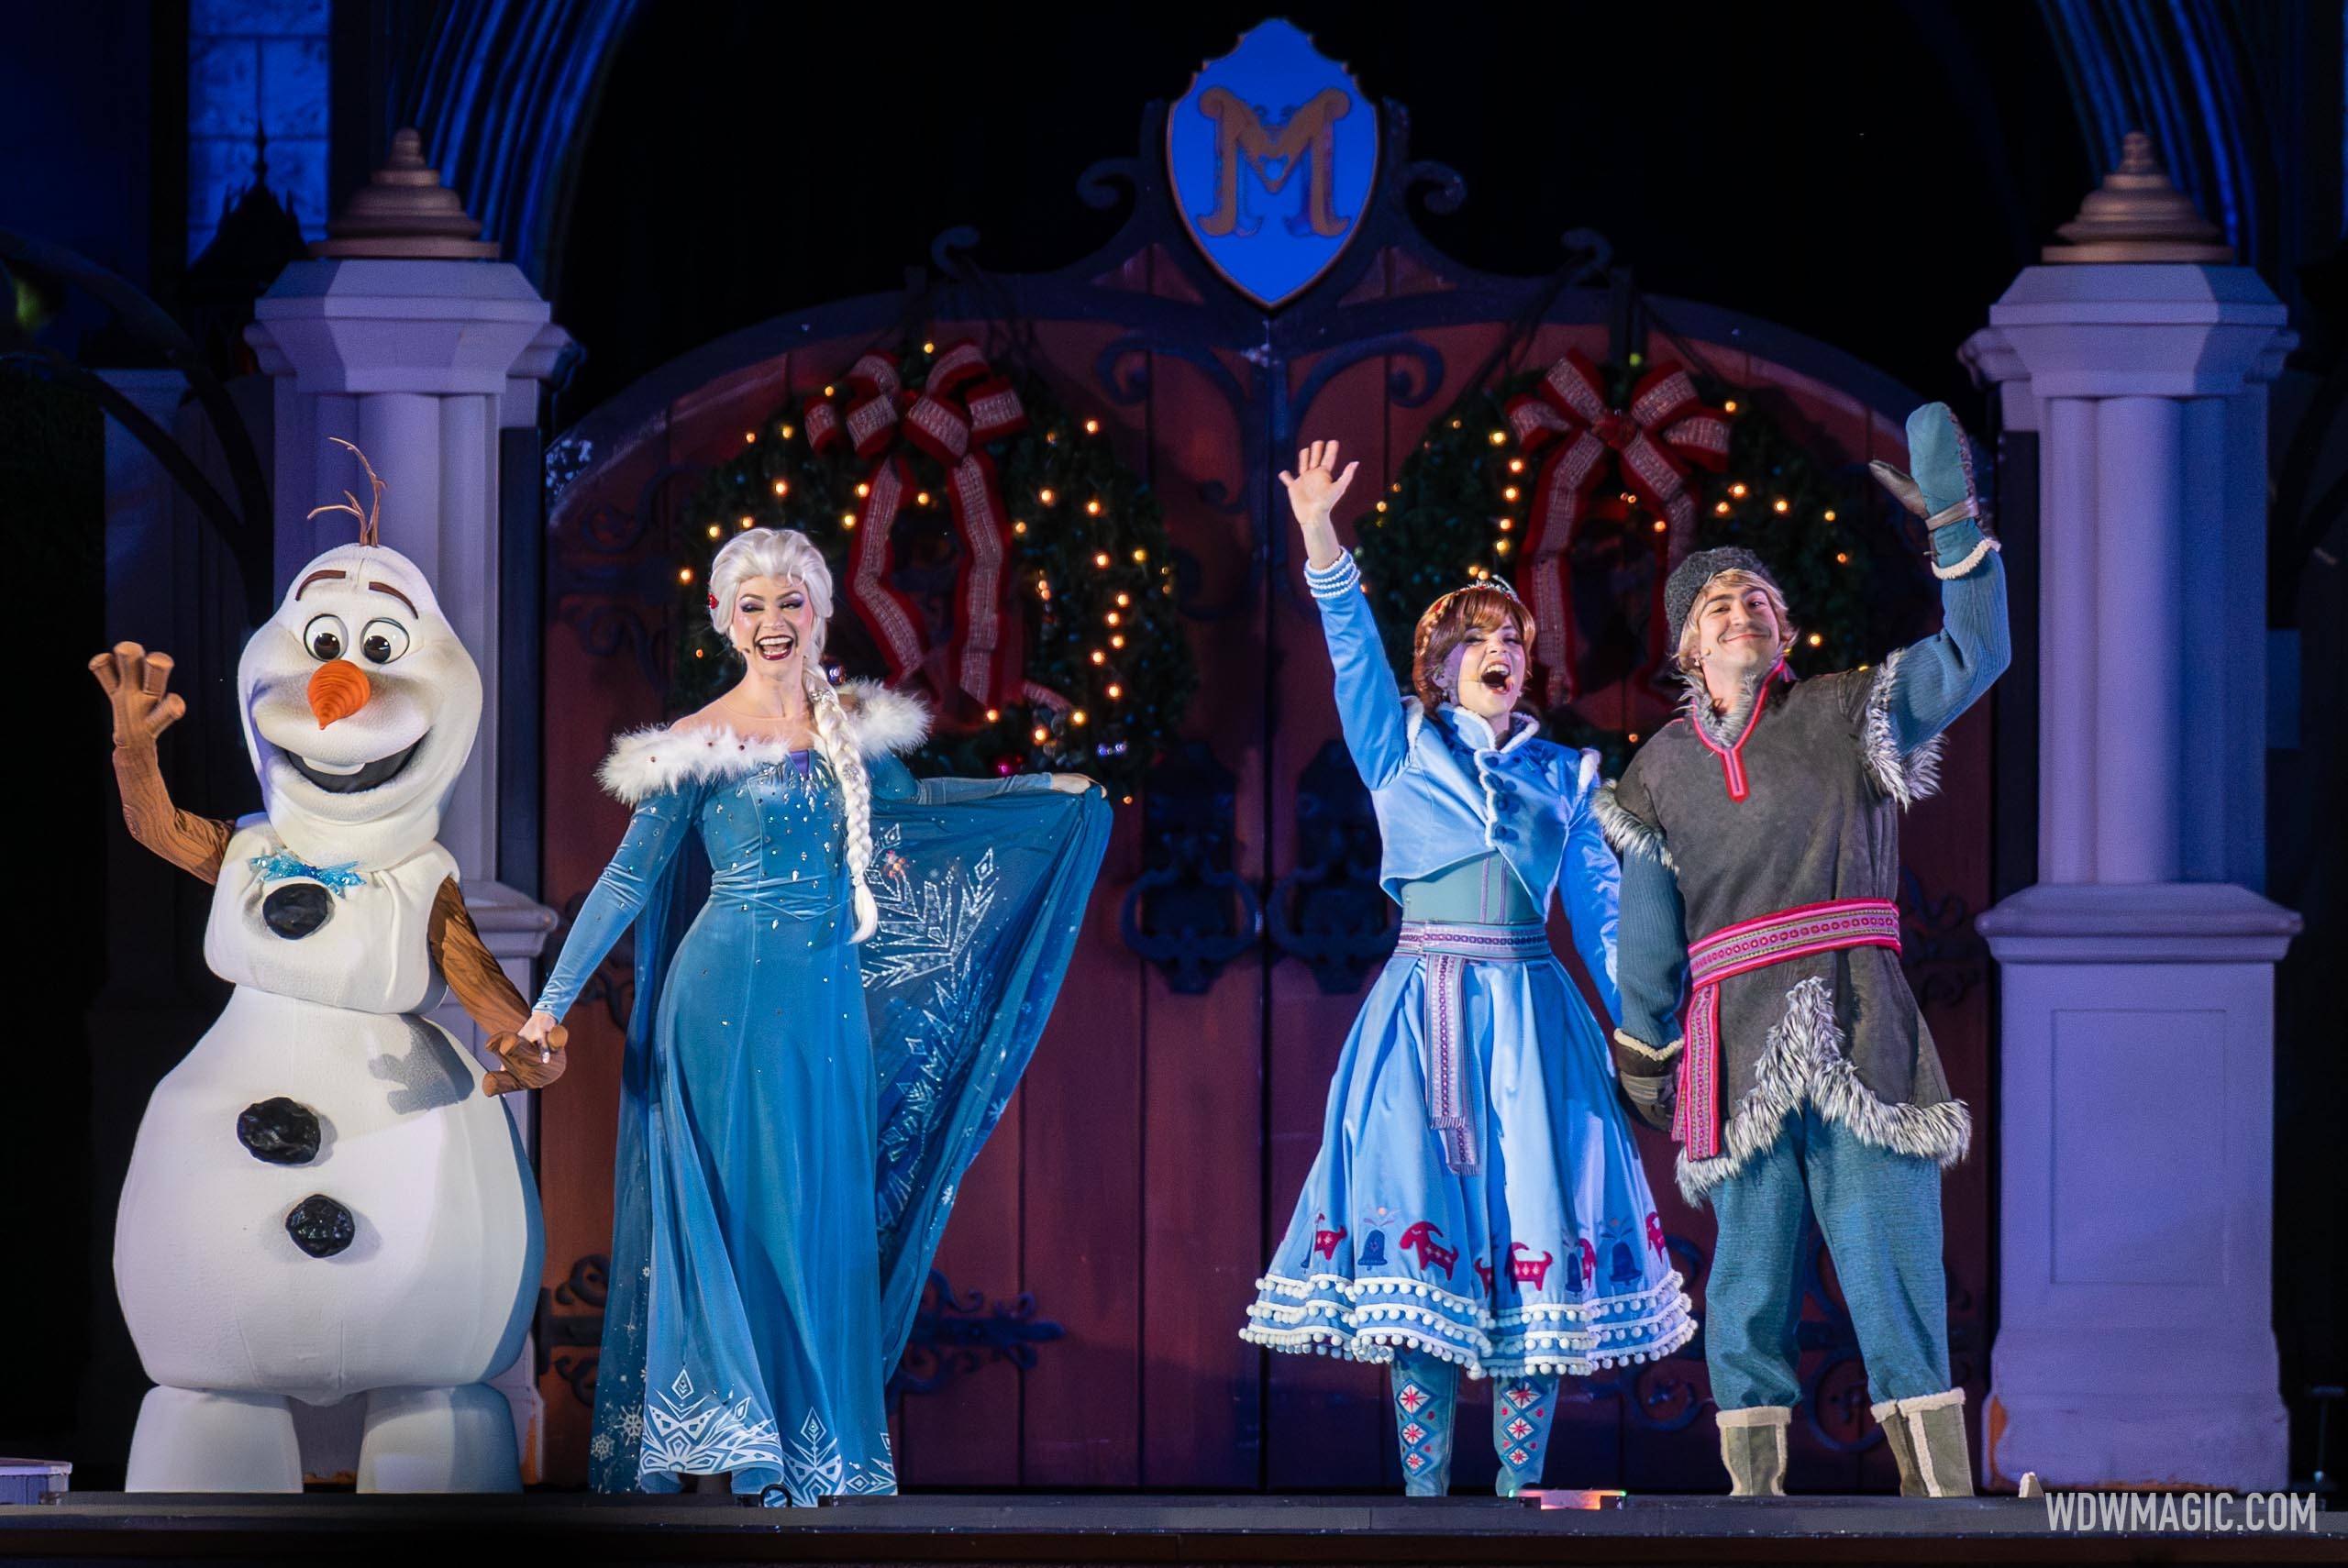 Frozen Holiday Surprise during Mickey's Very Merry Christmas Party